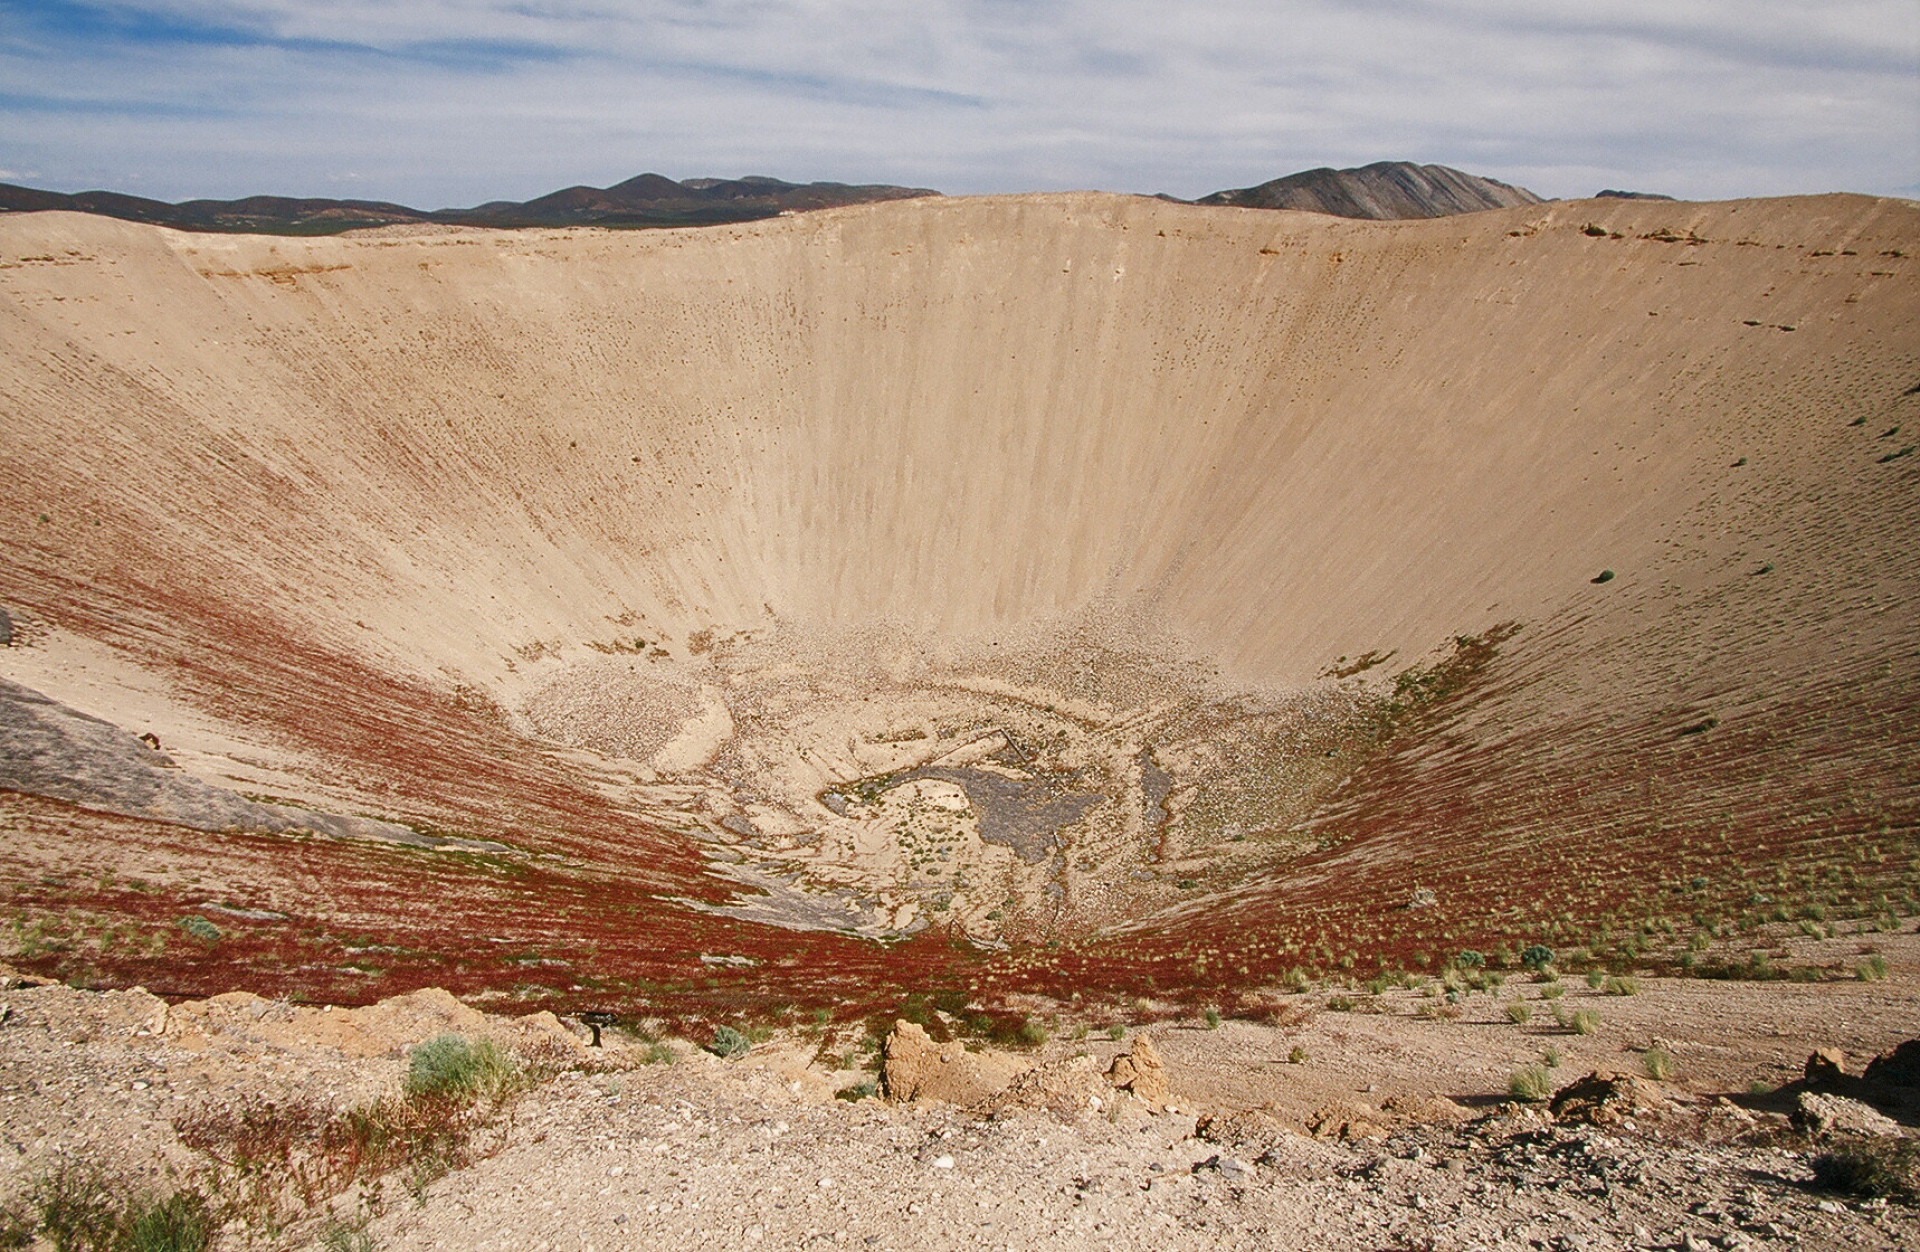 <p>The largest man-made crater in the US marks the spot where humans once tested mining with nukes.</p><p>You may also like:<a href="https://www.starsinsider.com/n/307188?utm_source=msn.com&utm_medium=display&utm_campaign=referral_description&utm_content=686881en-us"> Lady Dracula: The "blood countess" who reportedly killed 600 young girls</a></p>